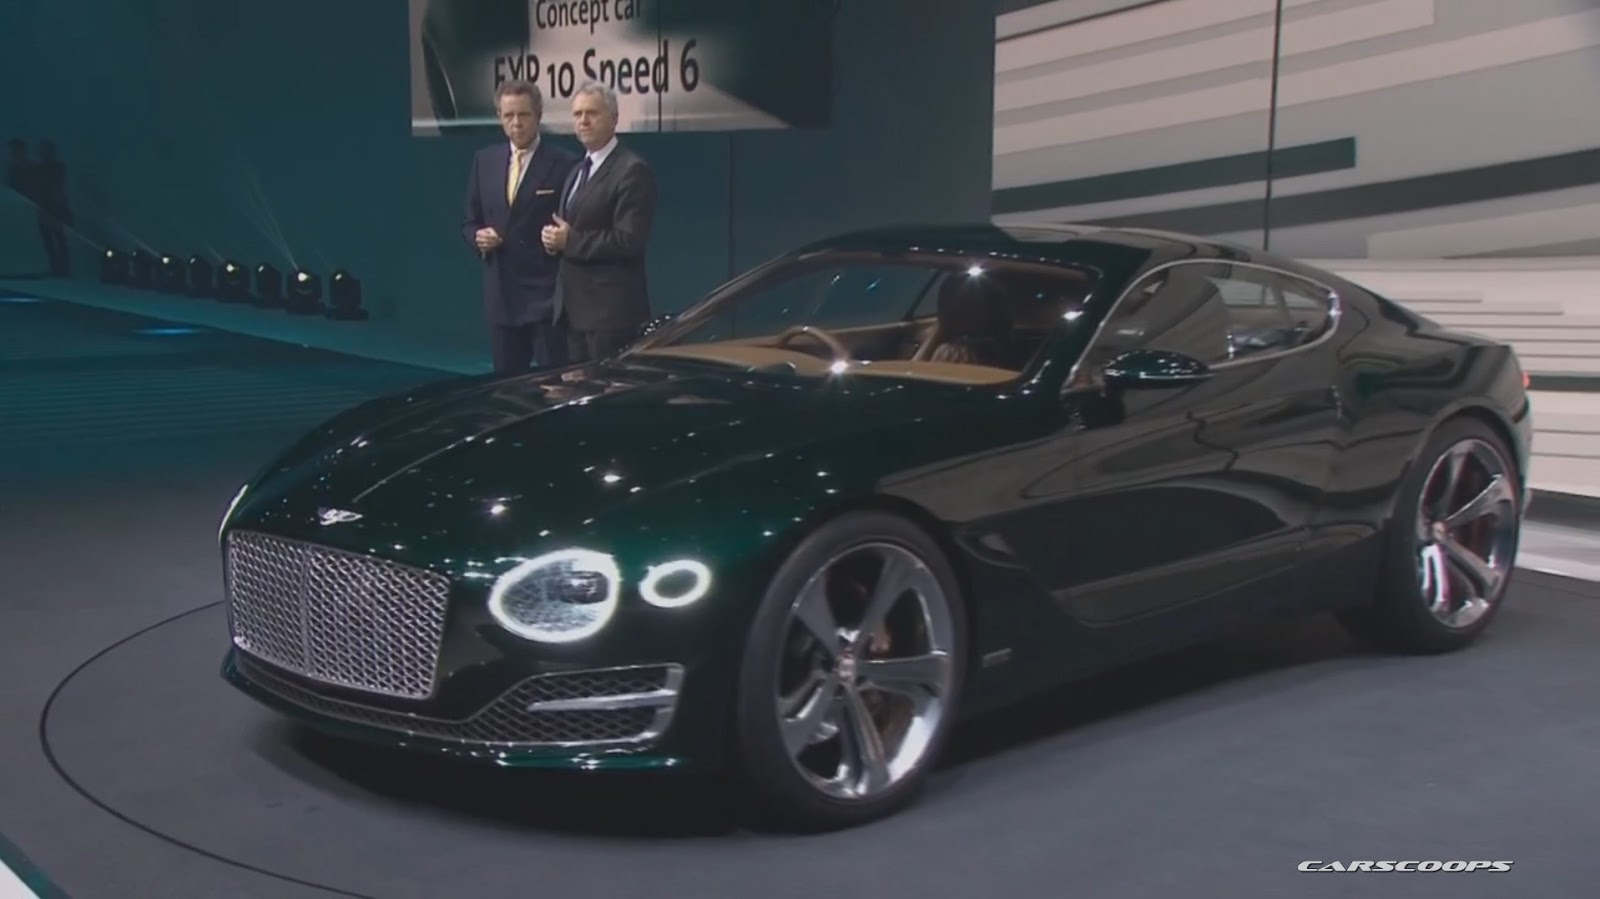 Bentley S New Exp 10 Speed 6 Sports Coupe Concept Hints At New Series Updated Carscoops